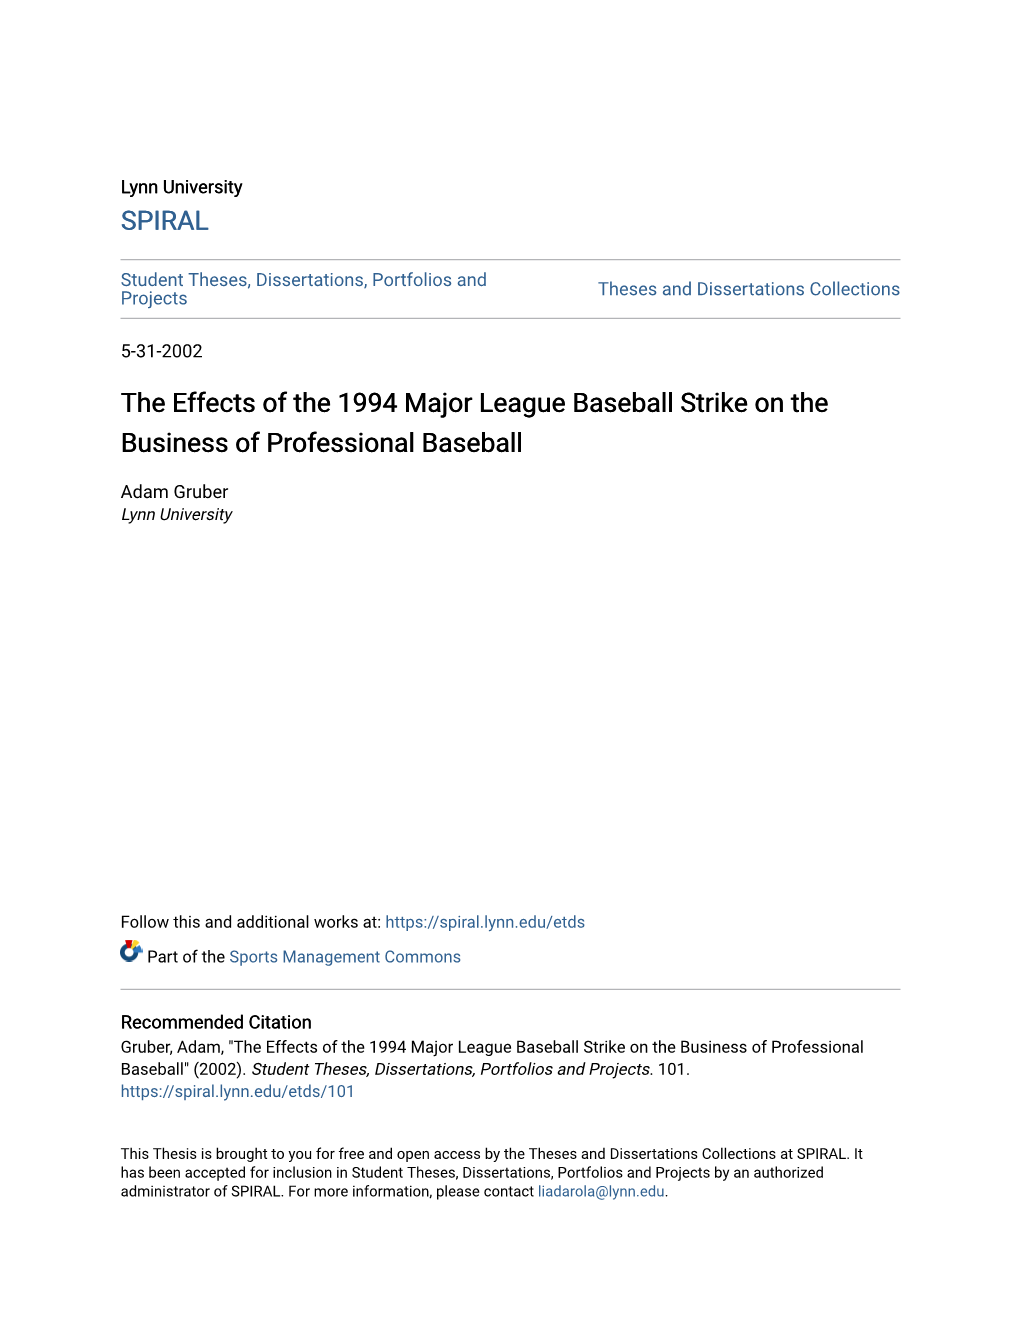 The Effects of the 1994 Major League Baseball Strike on the Business of Professional Baseball